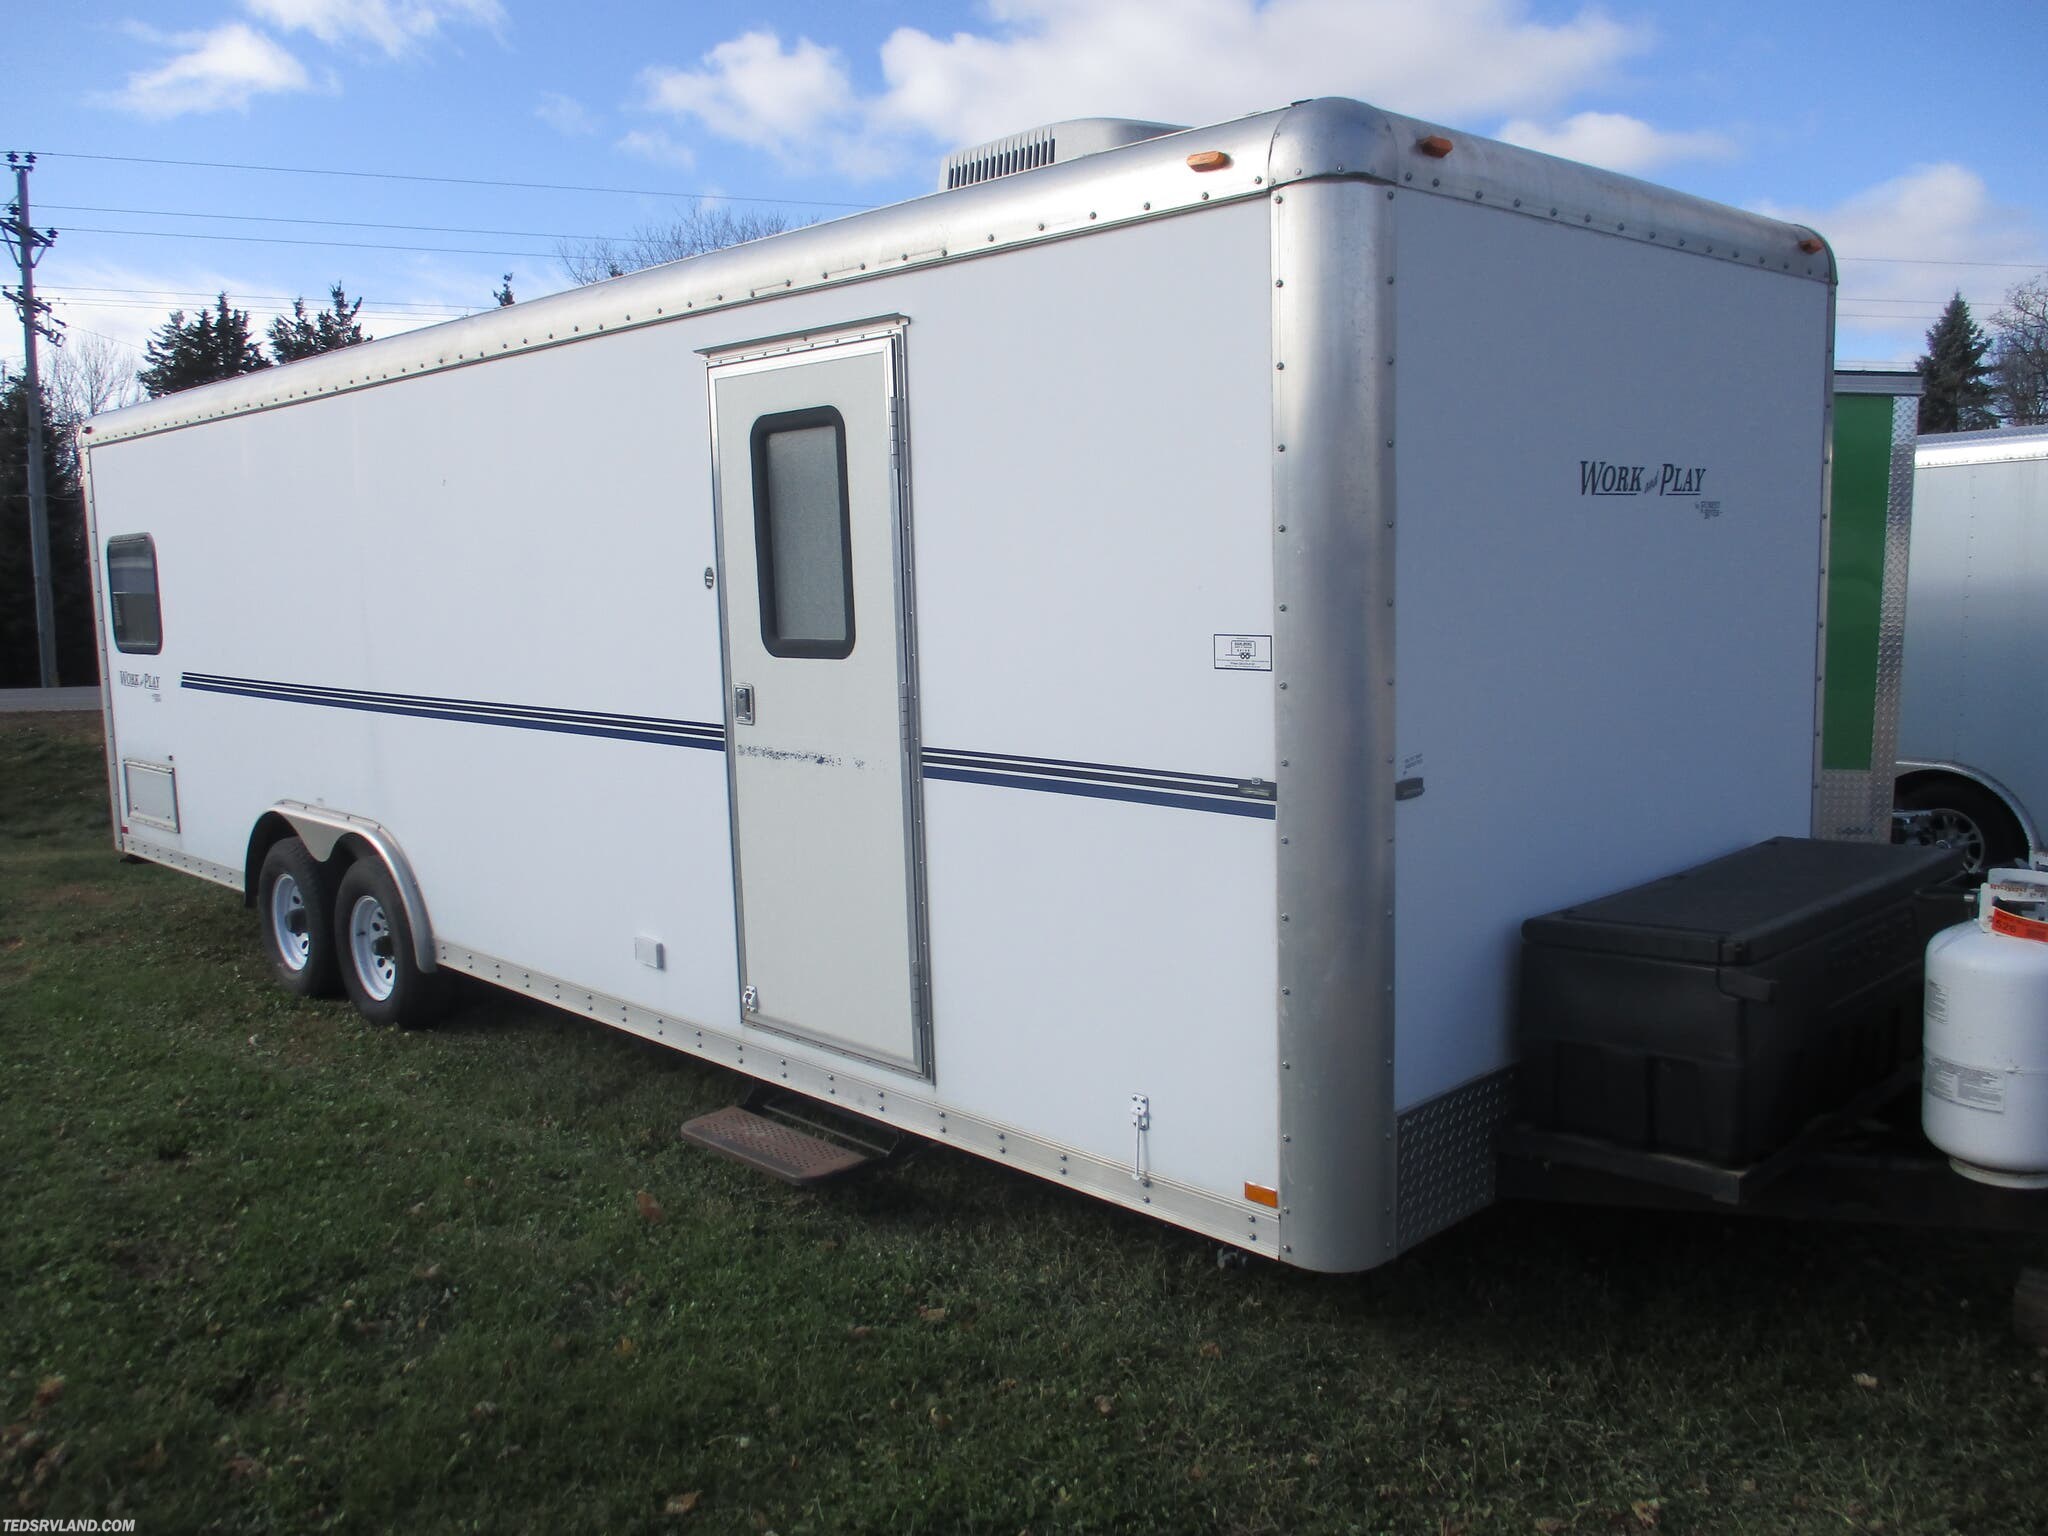 2004 Forest River Work And Play Toy Hauler Specs | Wow Blog 2004 Forest River Work And Play Toy Hauler Specs